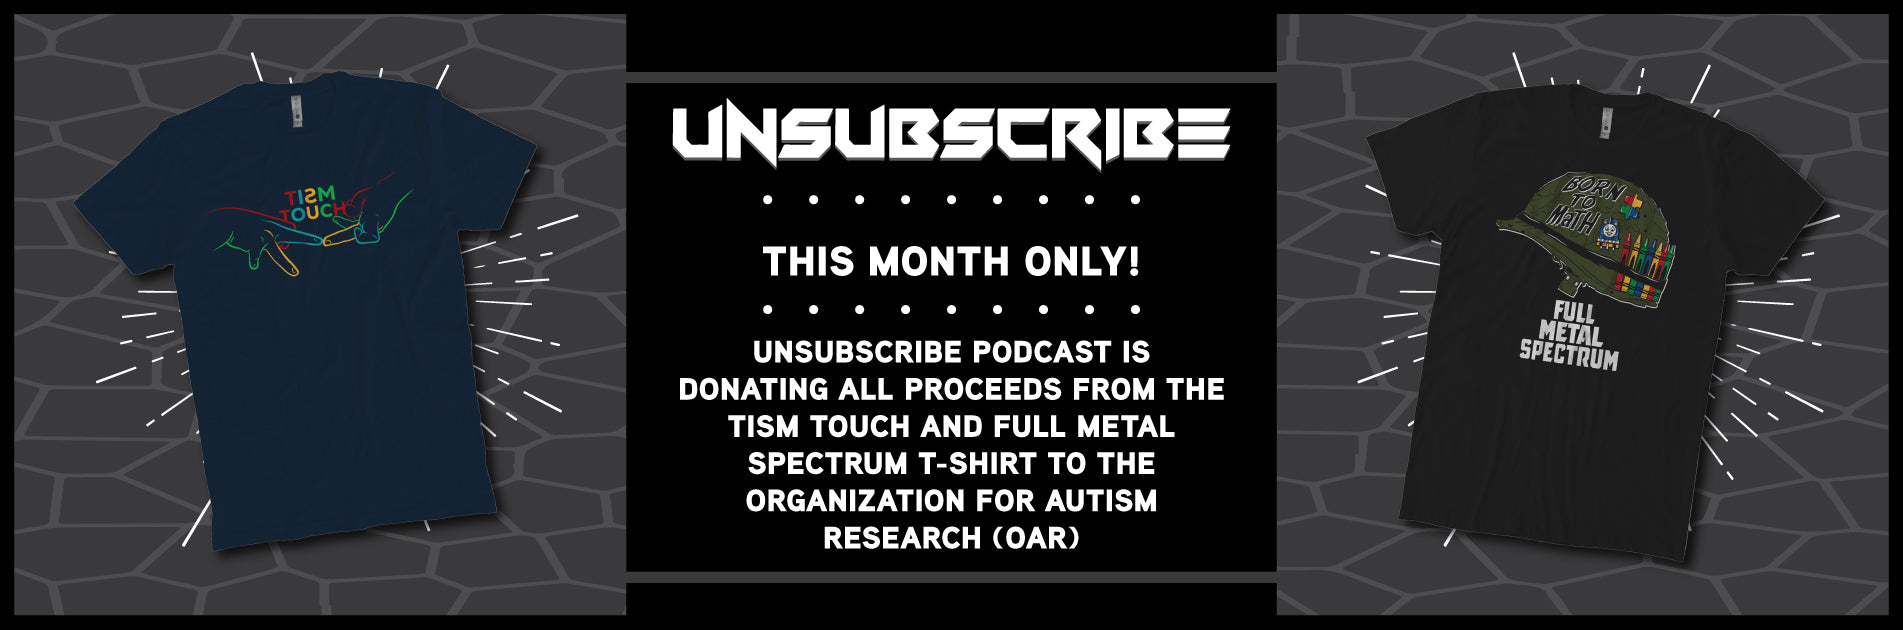 unsubscribe-podcast